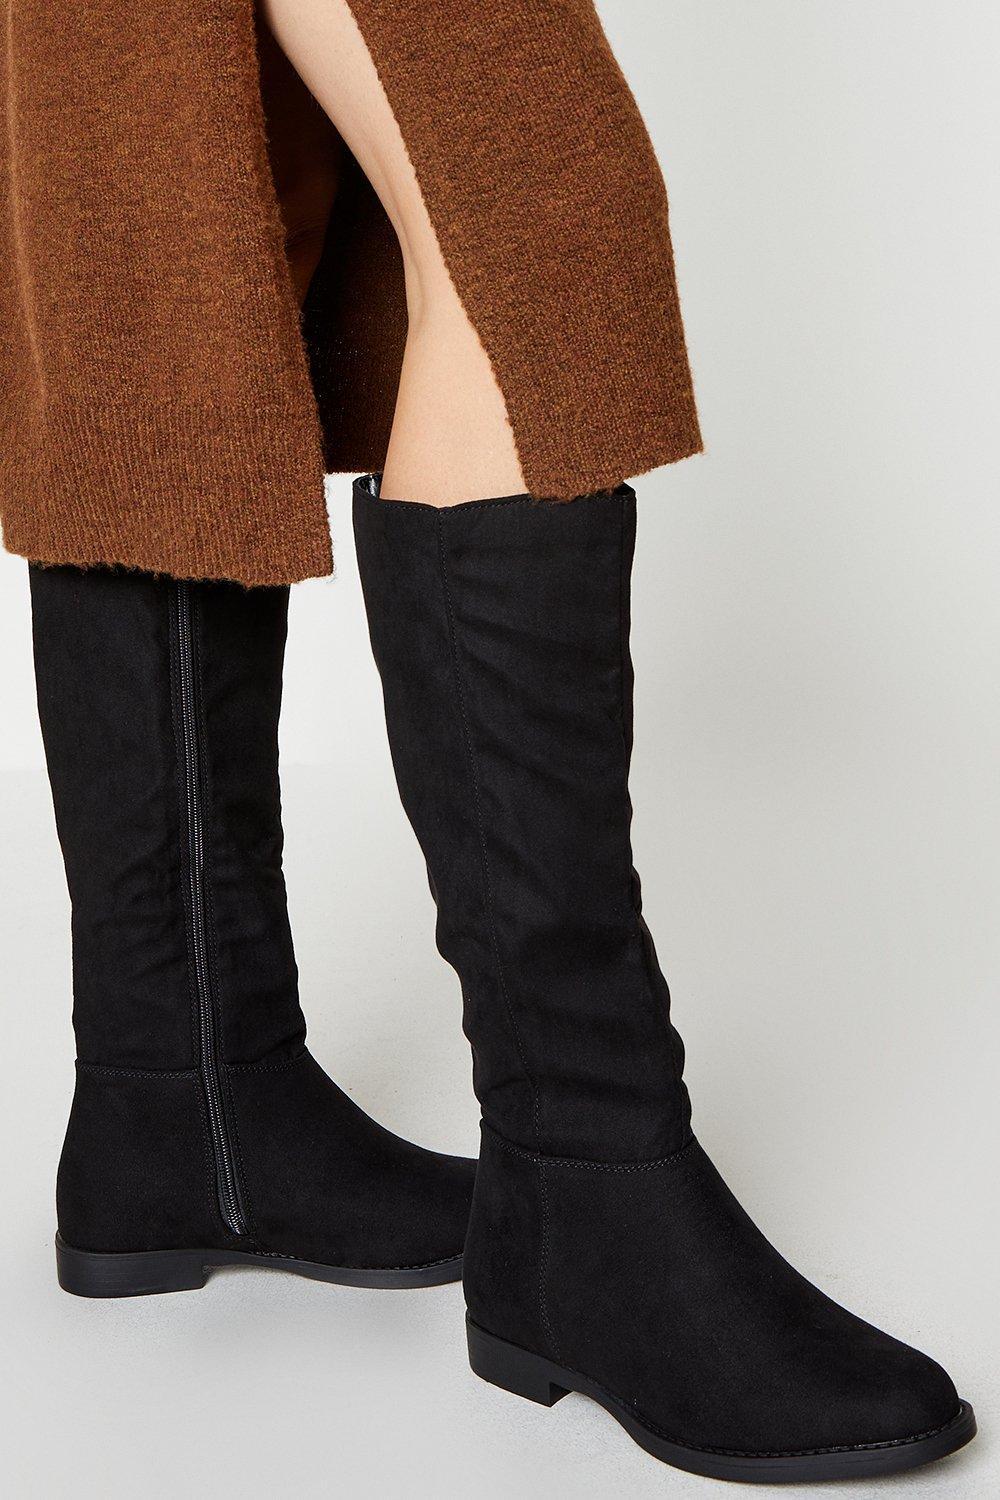 Dorothy Perkins Wide Fit Karla Flat Knee High Boots in Black | Lyst UK